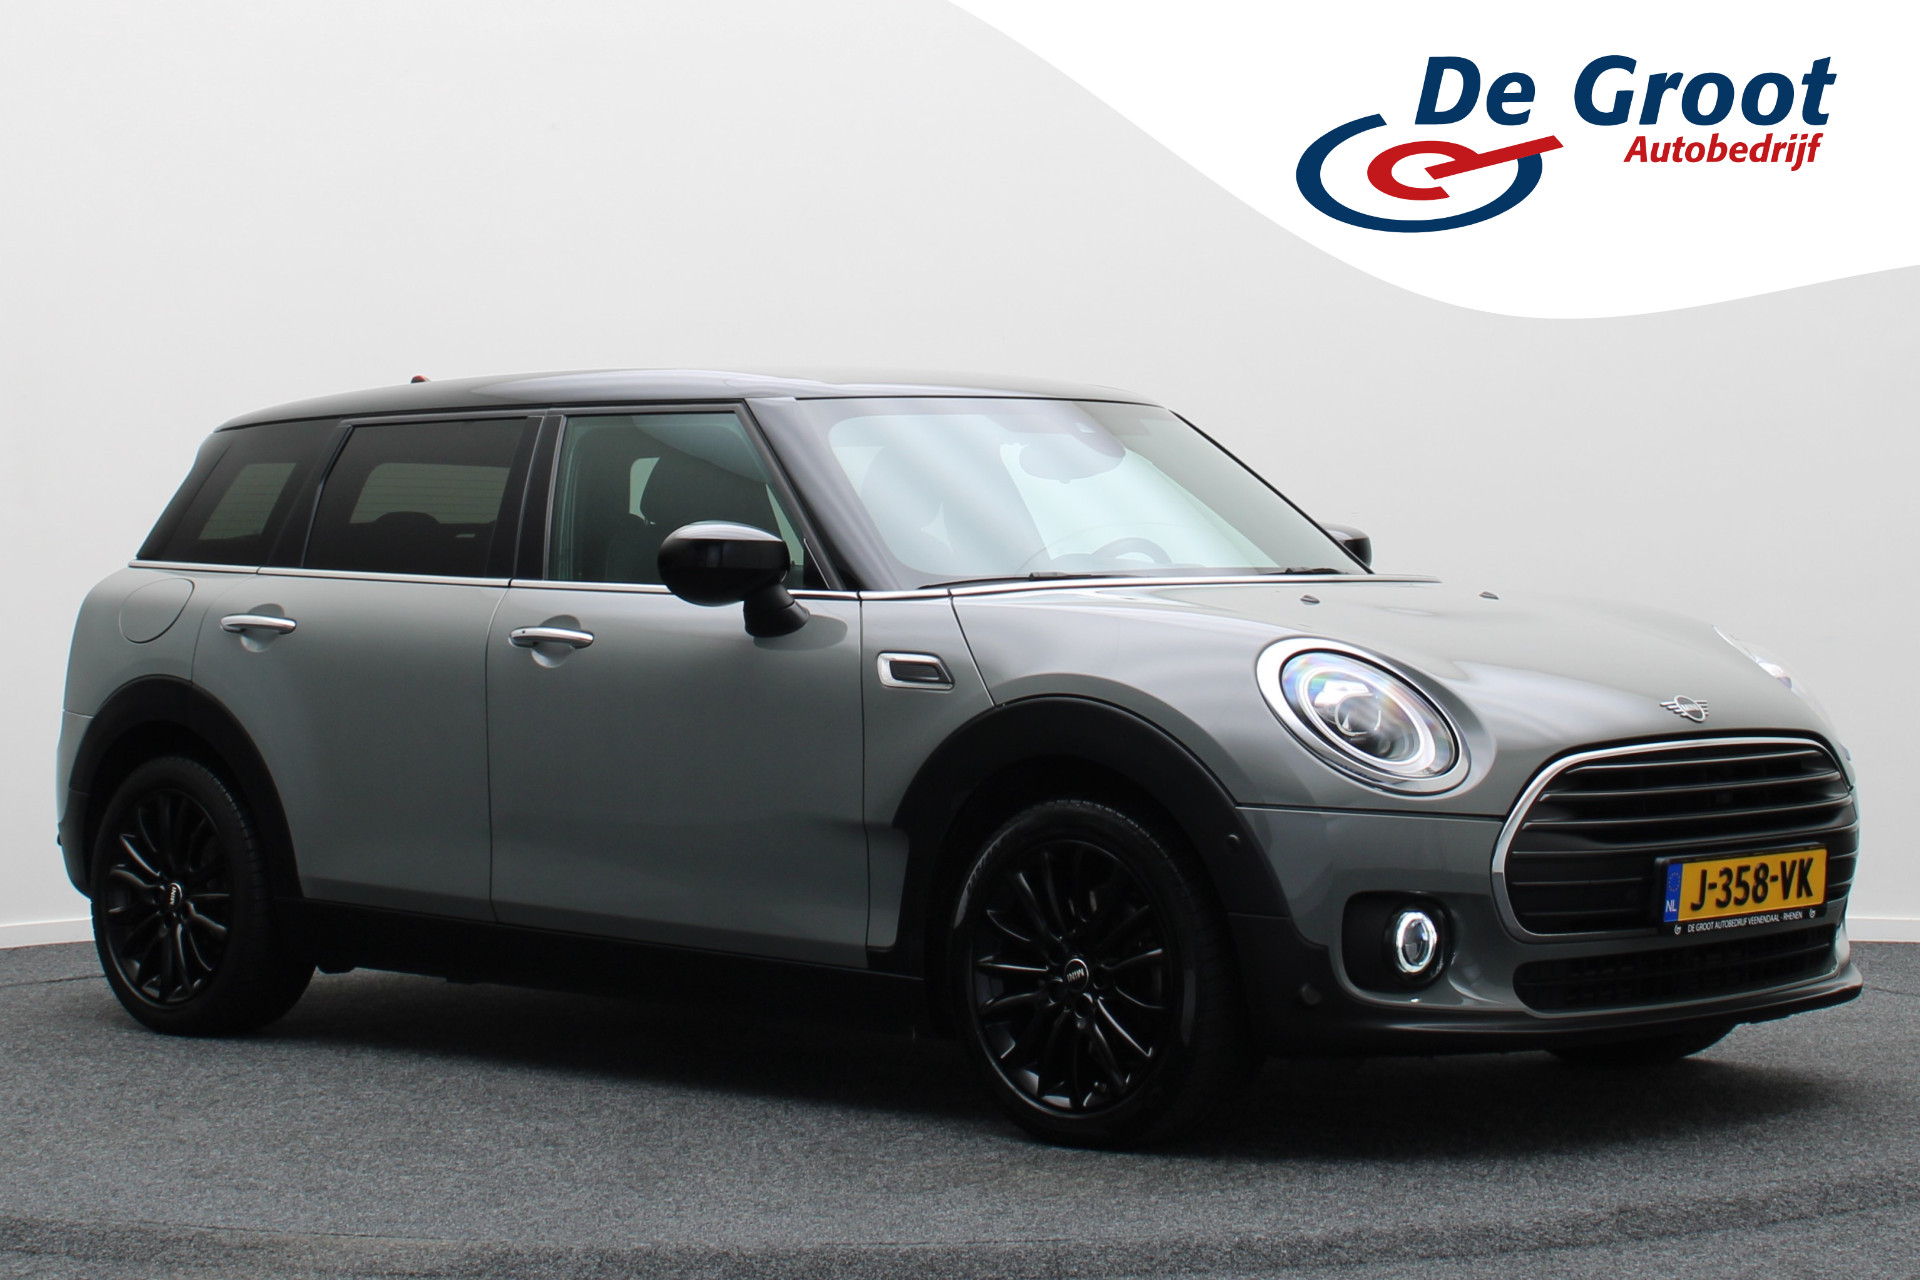 MINI Clubman 1.5 Cooper Business Edition Automaat LED, Keyless, Two-Tone lak, Navigatie, Cruise, PDC, Climate, 17” bij viaBOVAG.nl